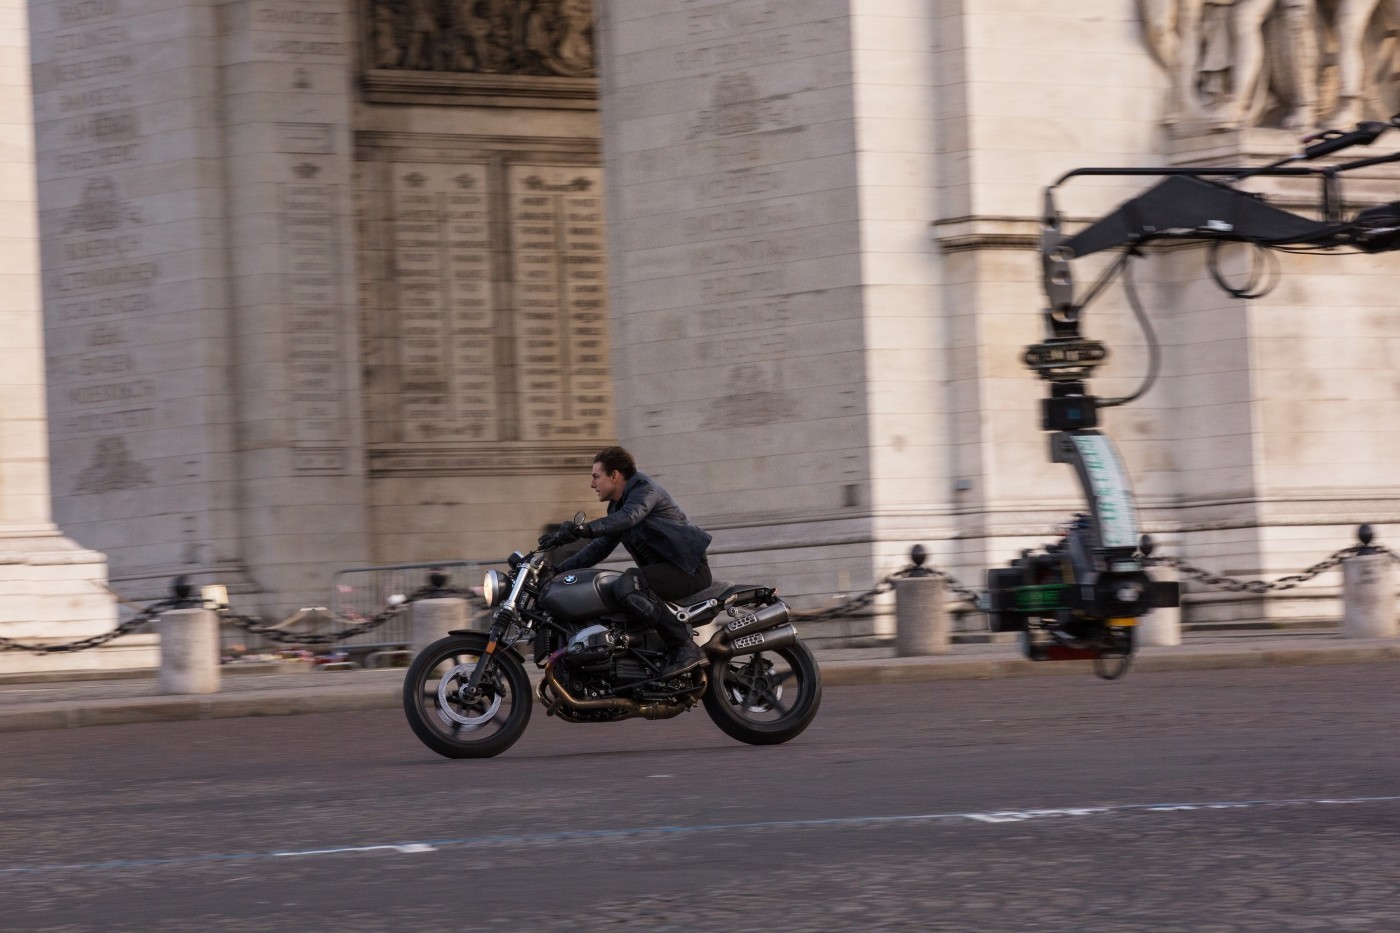 mission-impossible-7-set-appeared-to-show-tom-cruise-on-a-motorcycle-2